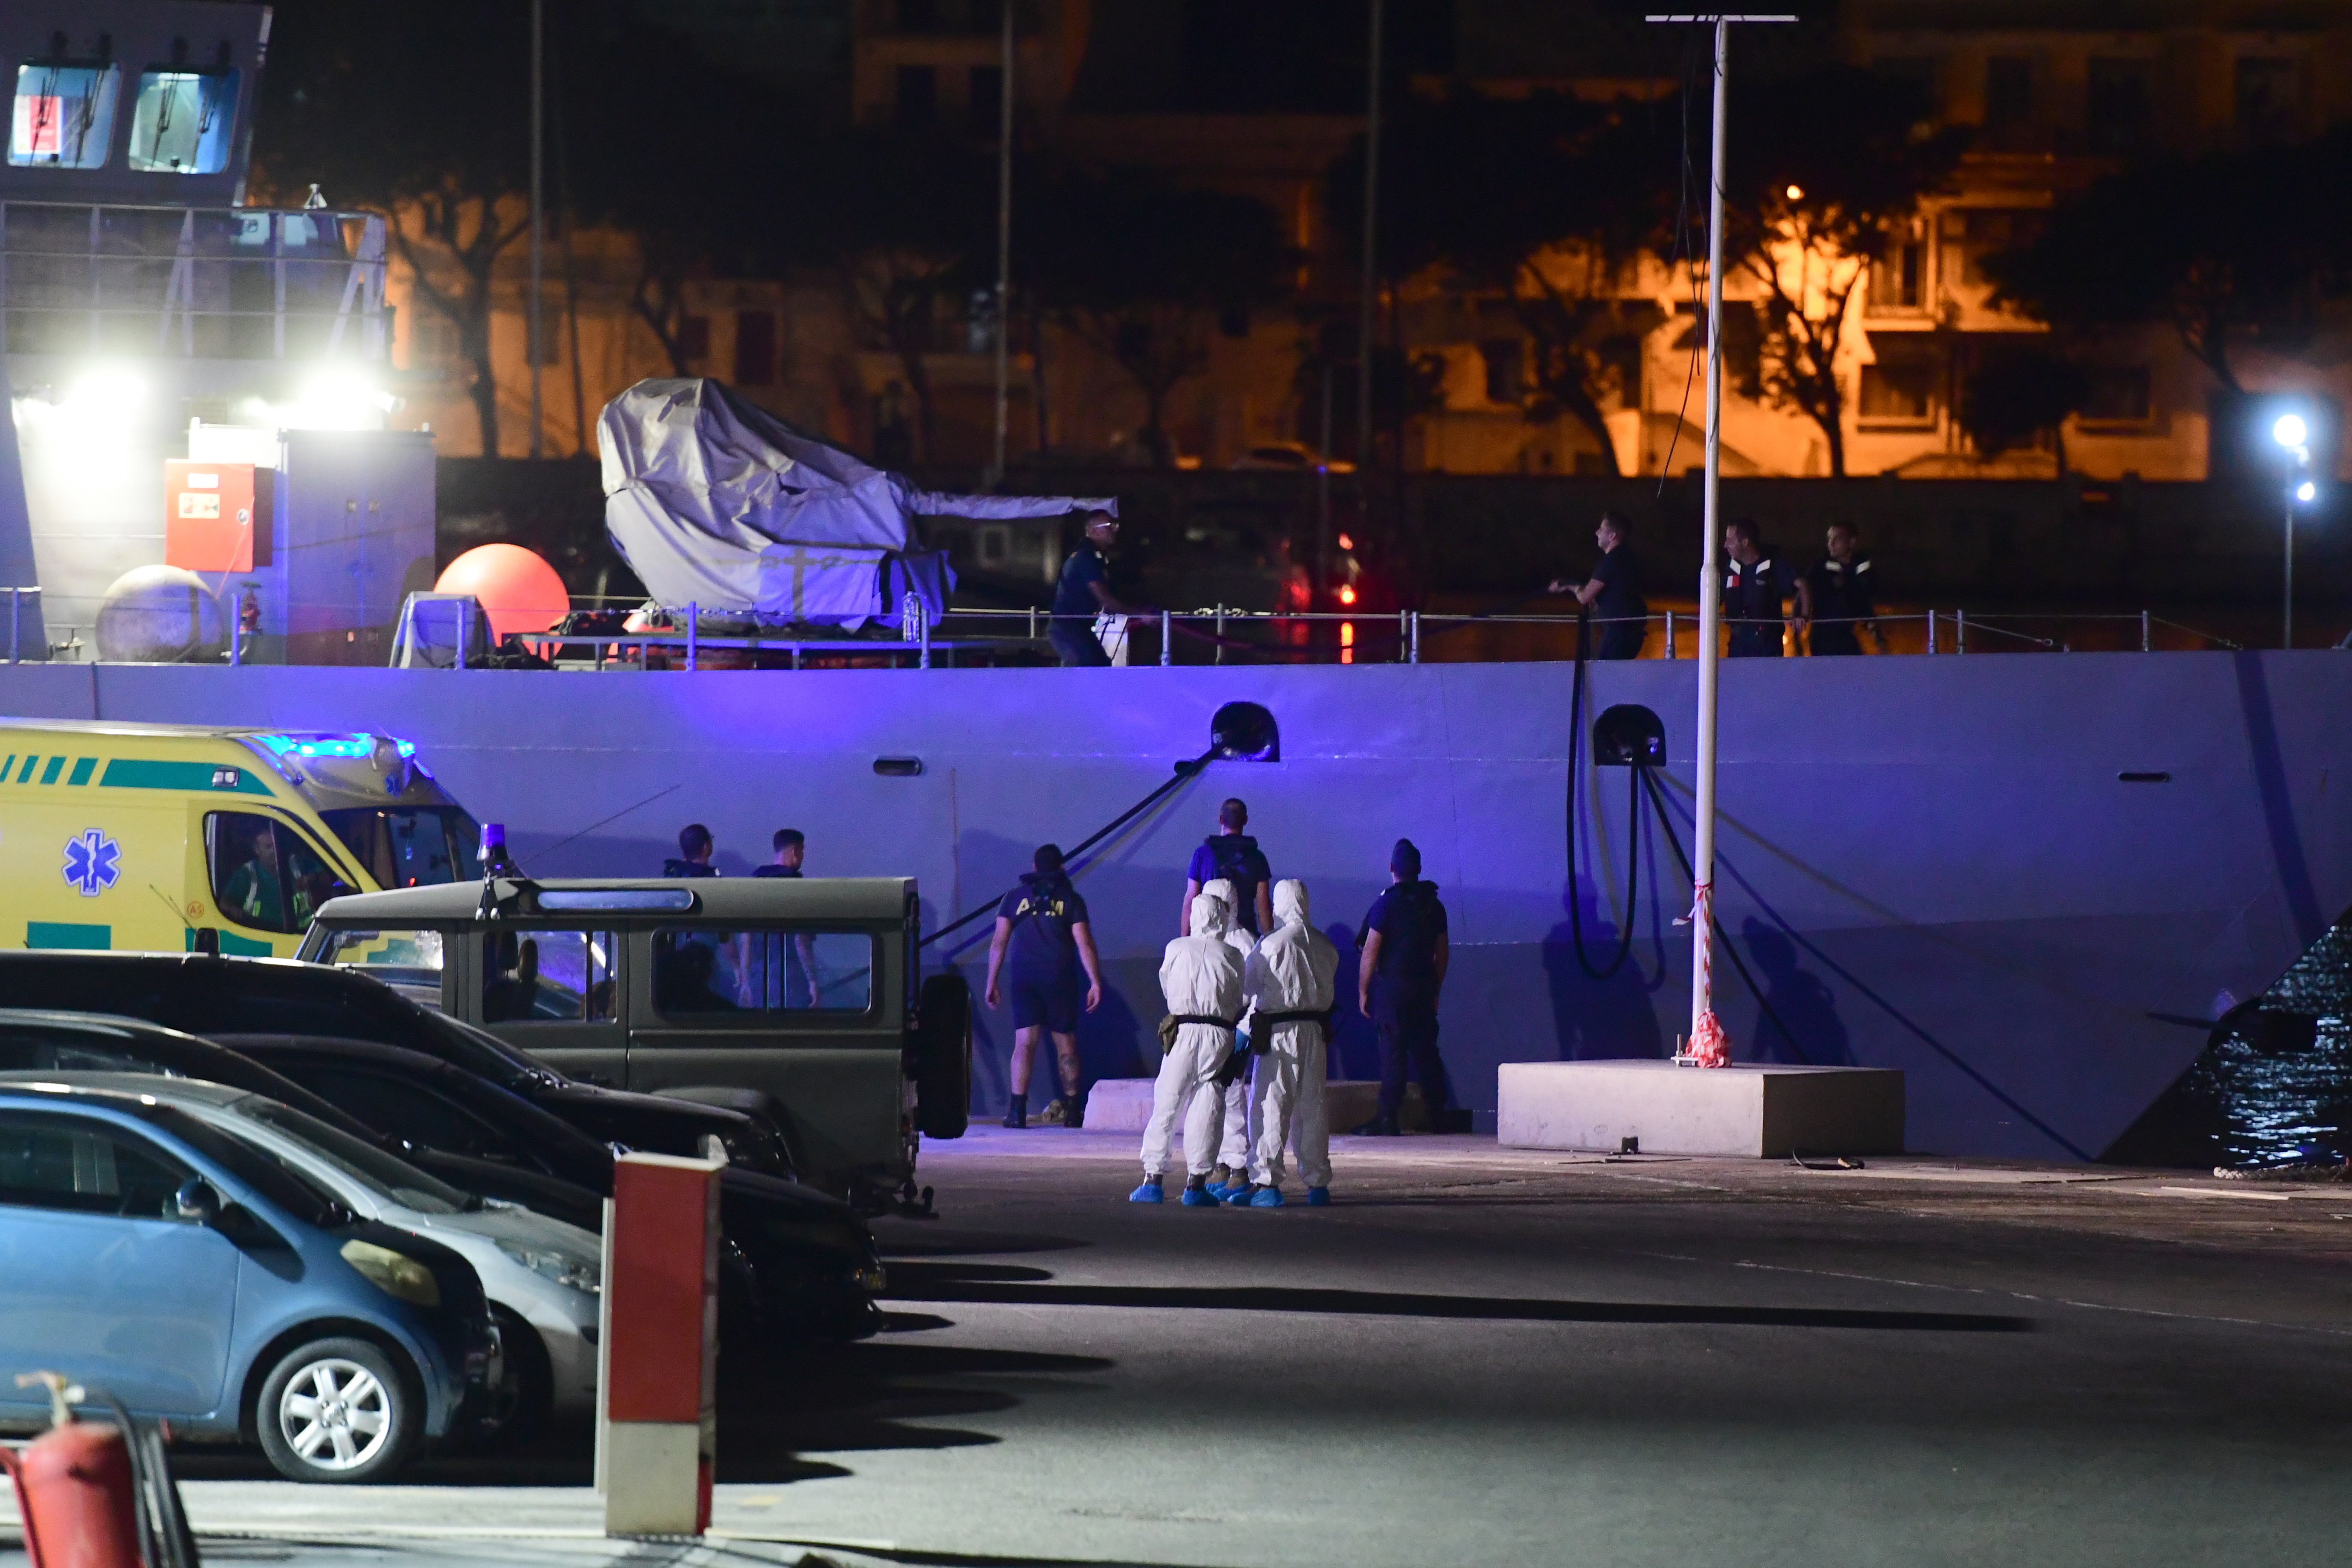 epa07789530 Officials on board an AFM vessel after some 356 migrants, who had been stranded on the NGO rescue ship Ocean Viking for 13 days in the Mediterranean, arrived at Hay Wharf maritime base in Floriana, Malta, late 23 August 2019 (issued 24 August 2019). Some 356 African migrants aboard the rescue ship Ocean Viking migrants will be re-distributed to six other EU states (France, Germany, Ireland, Luxembourg, Portugal and Romania), the Maltese government said.  EPA/STRINGER